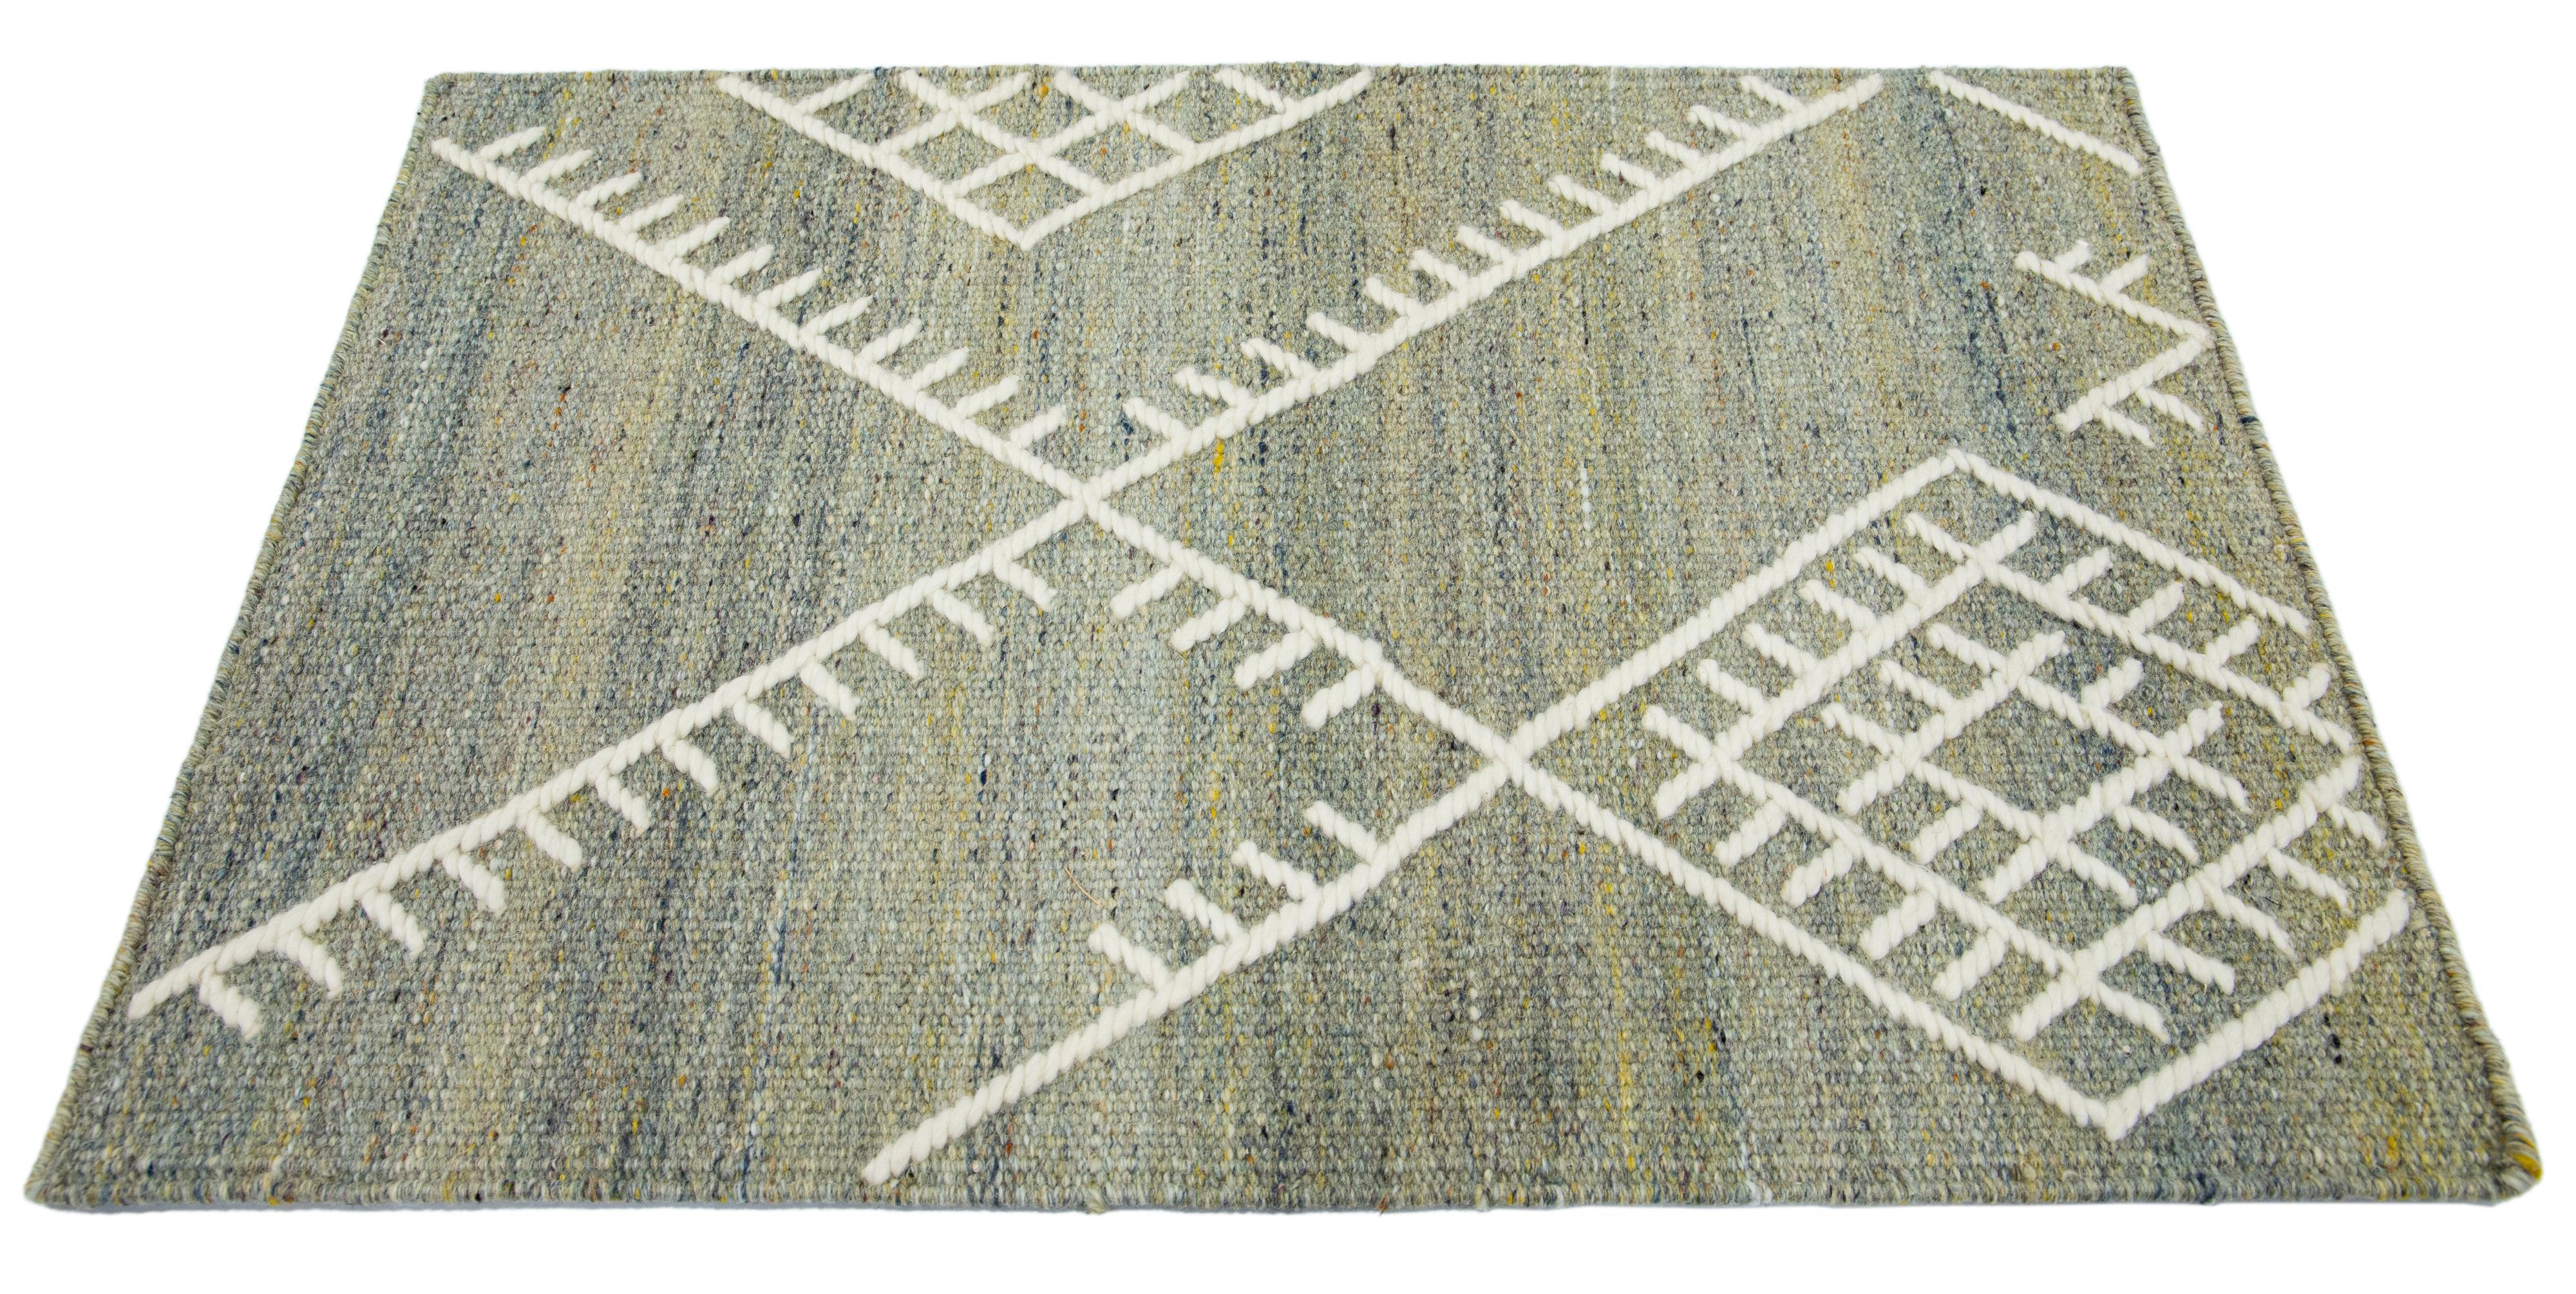 Apadana's Nantucket Collection wool custom rug. Custom sizes and colors made-to-order. 

Material: Wool 
Techniques: Flatweave
Style: Geometric-Coastal
Lead time: Approx. 15-16 wks available 
Colors: As shown, other custom colors are available.